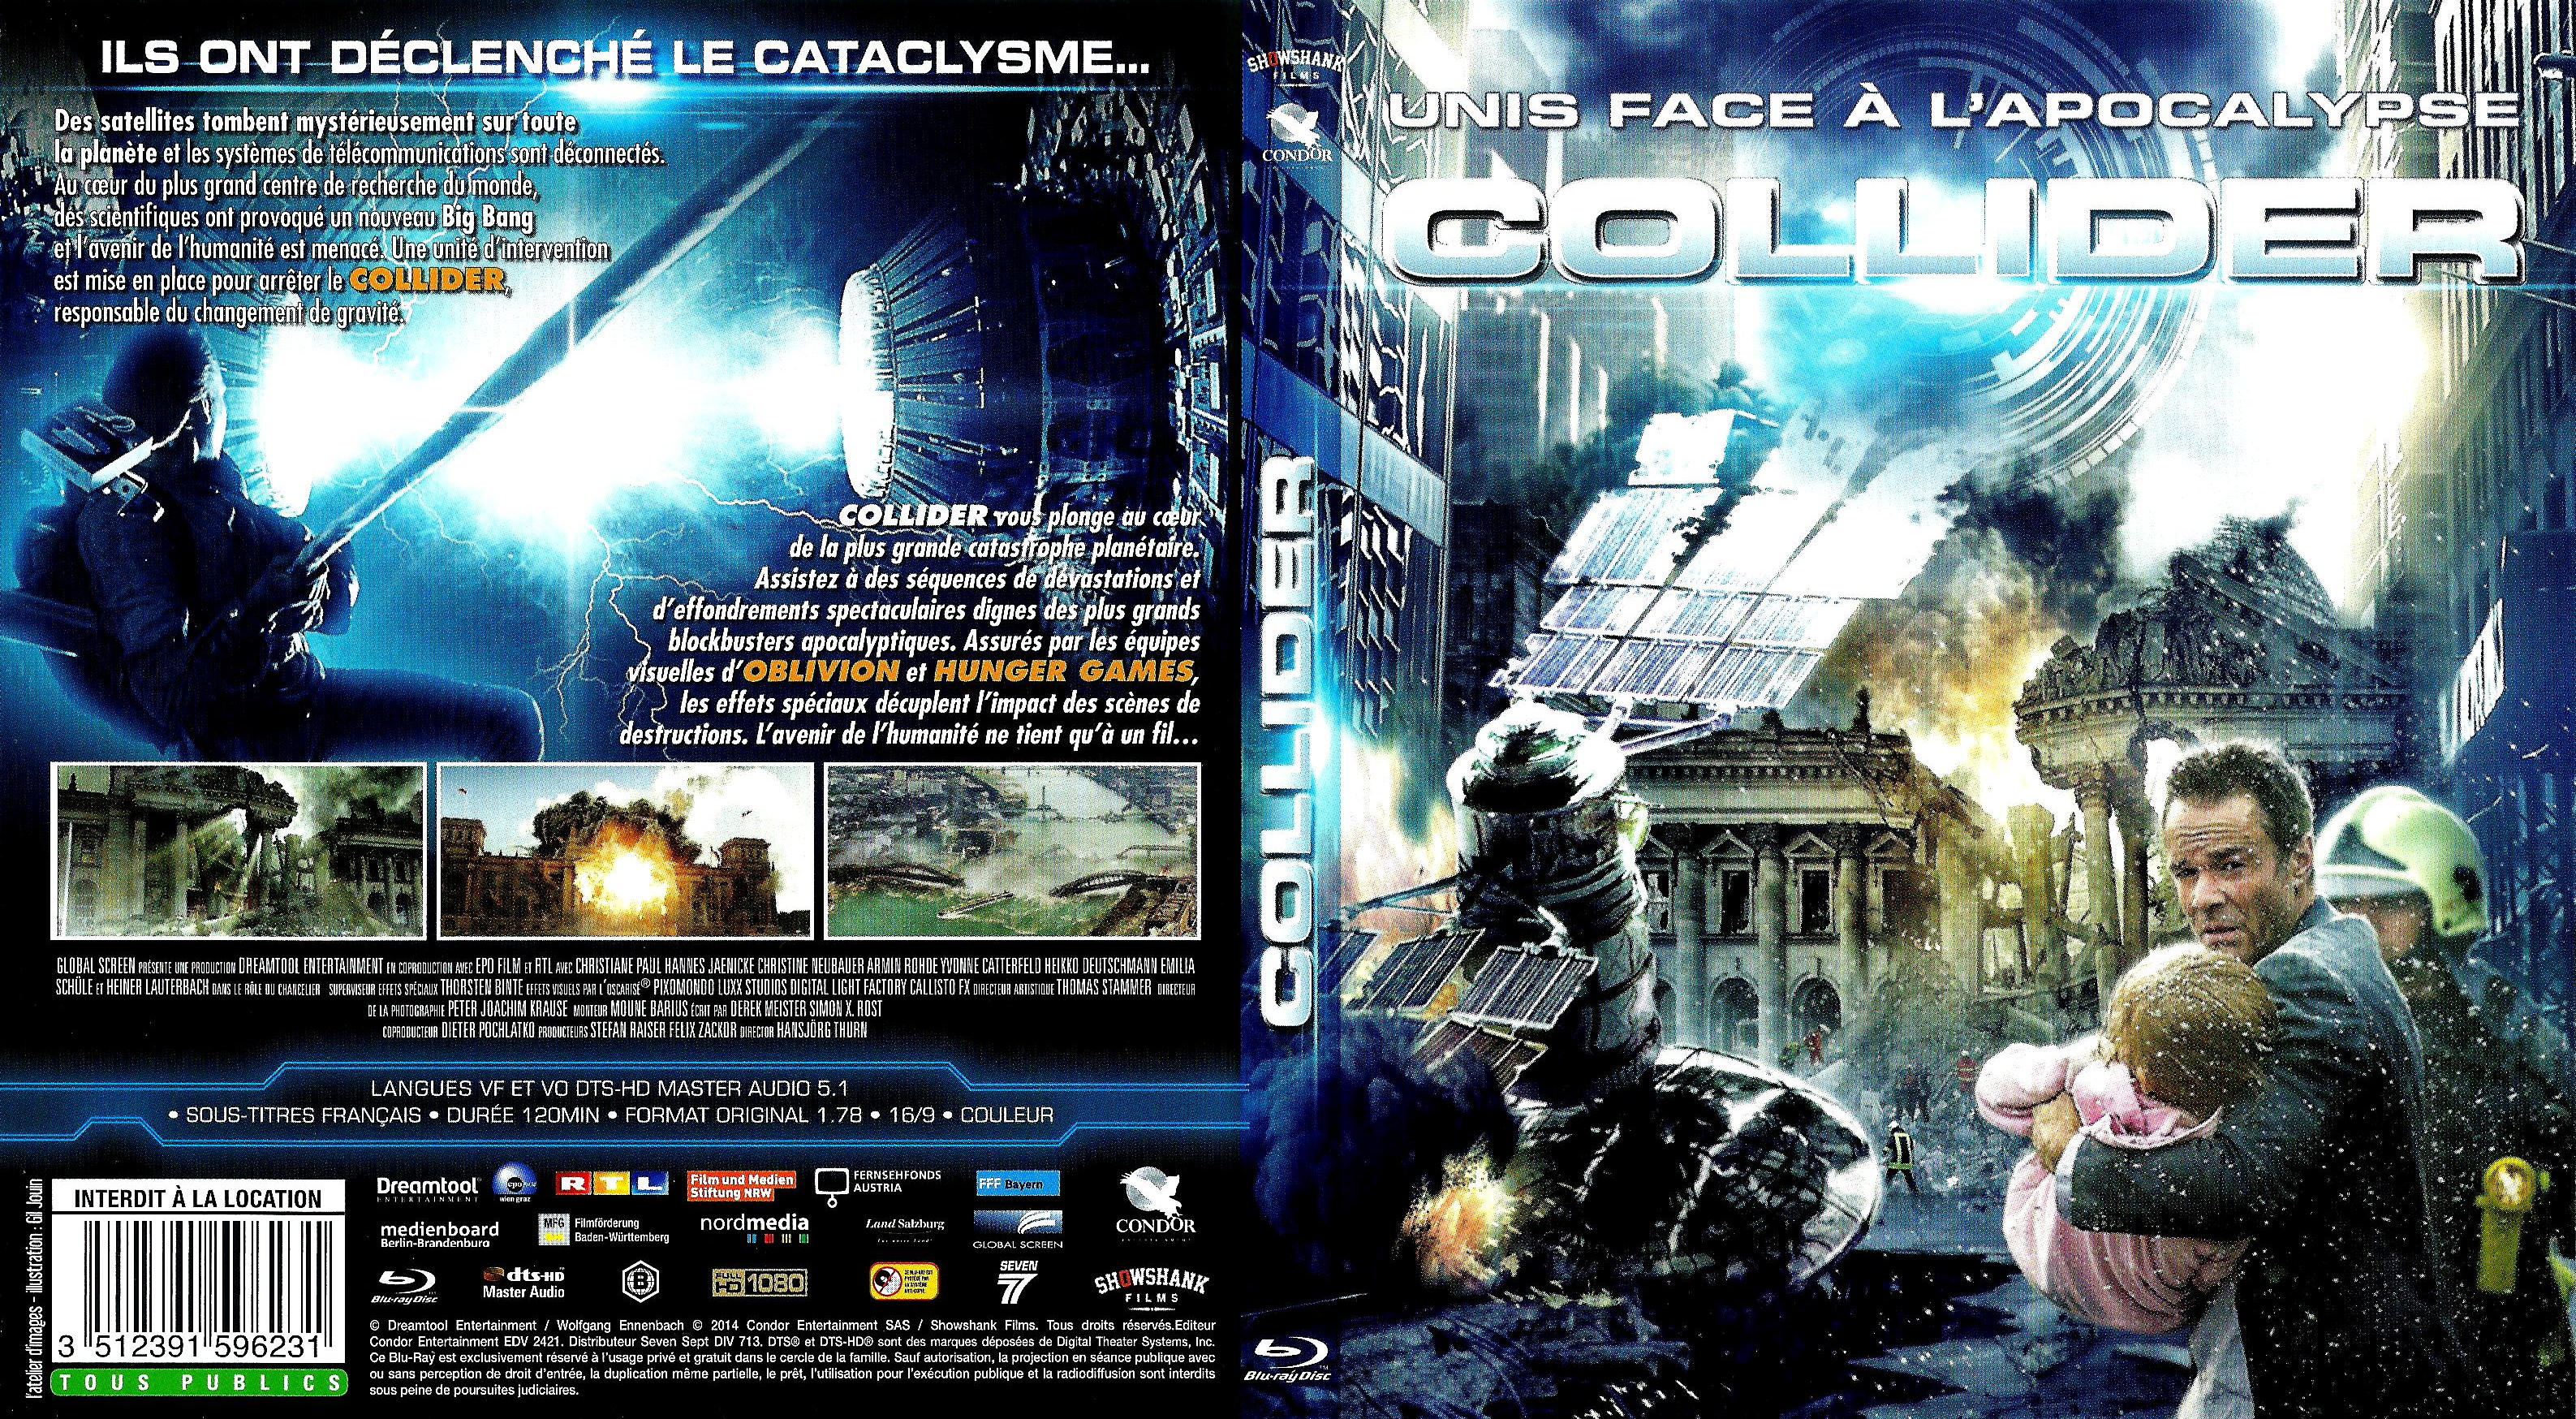 Jaquette DVD Collider (BLU-RAY)